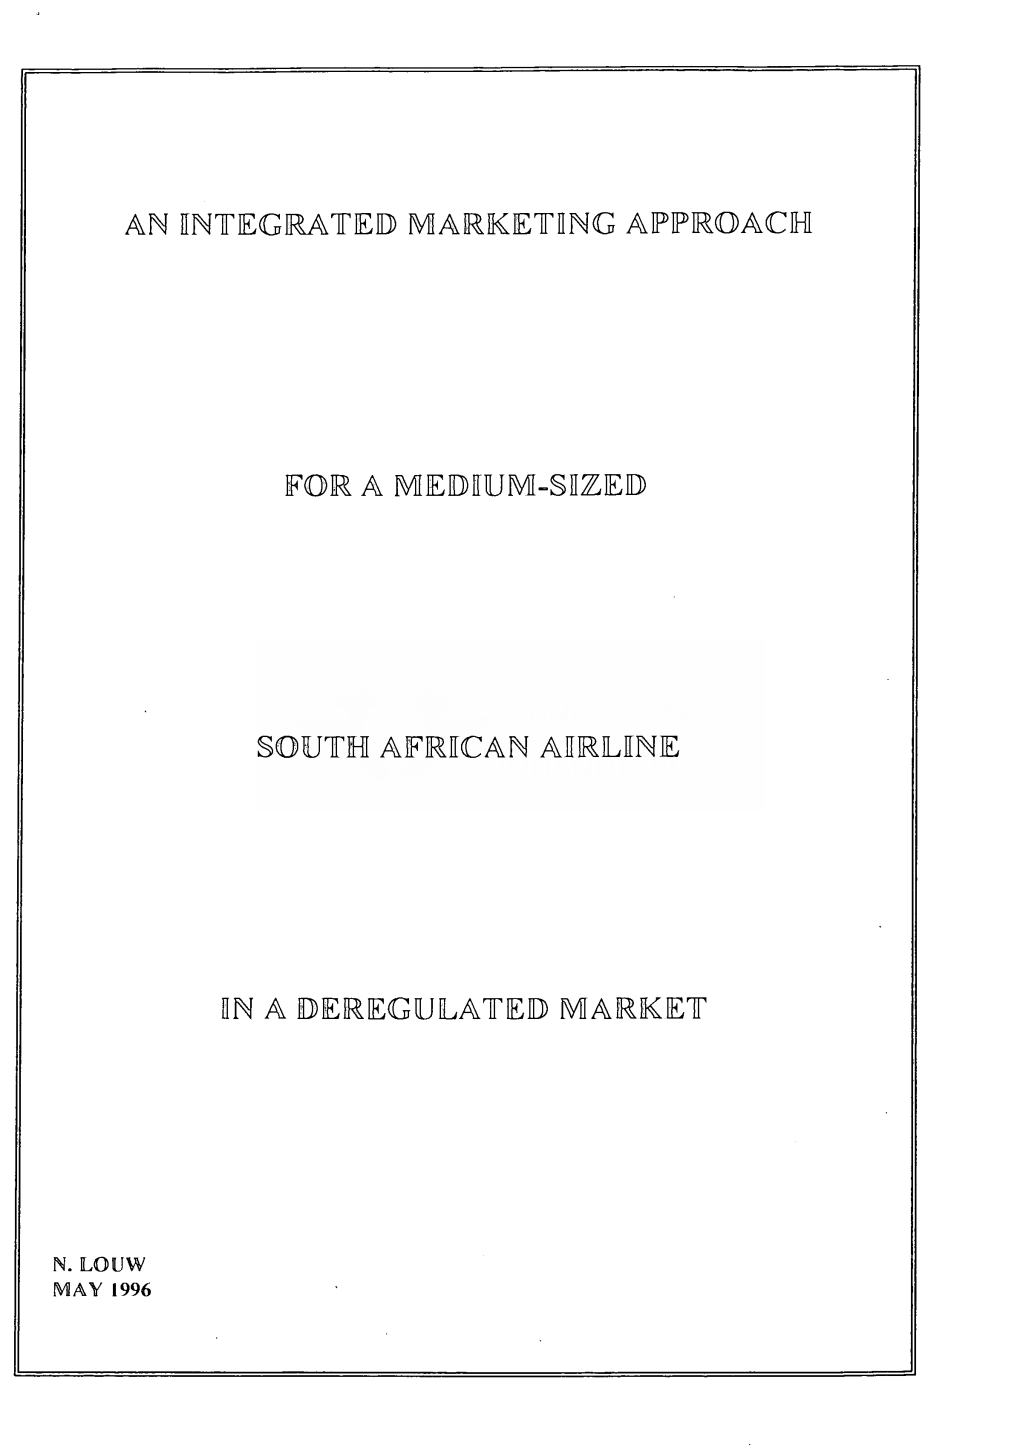 An Integrated Marketing Approach for a Medium-Sized South African